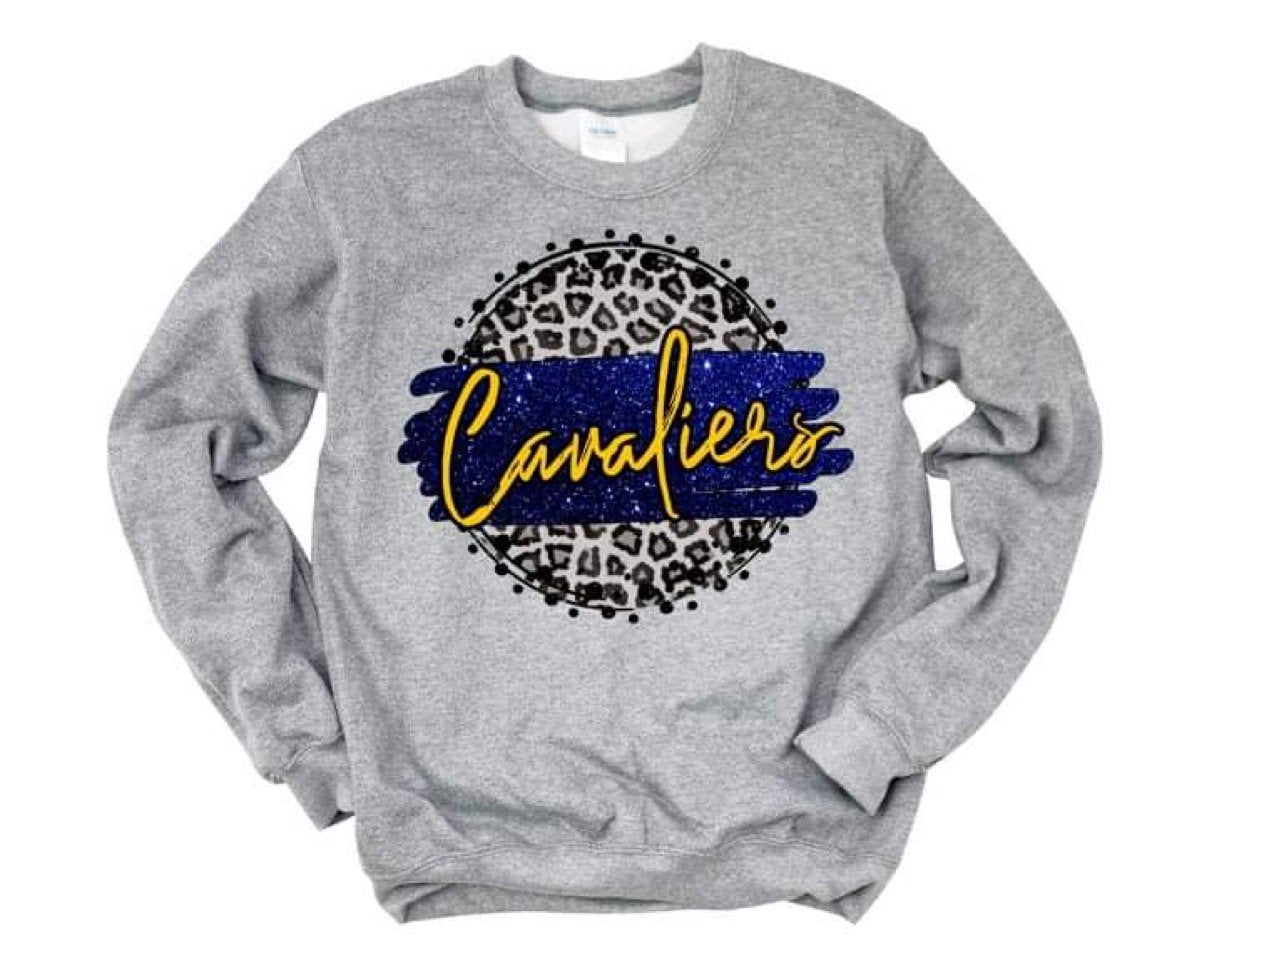 Cavaliers Royal Blue And Yellow Gold Shirt